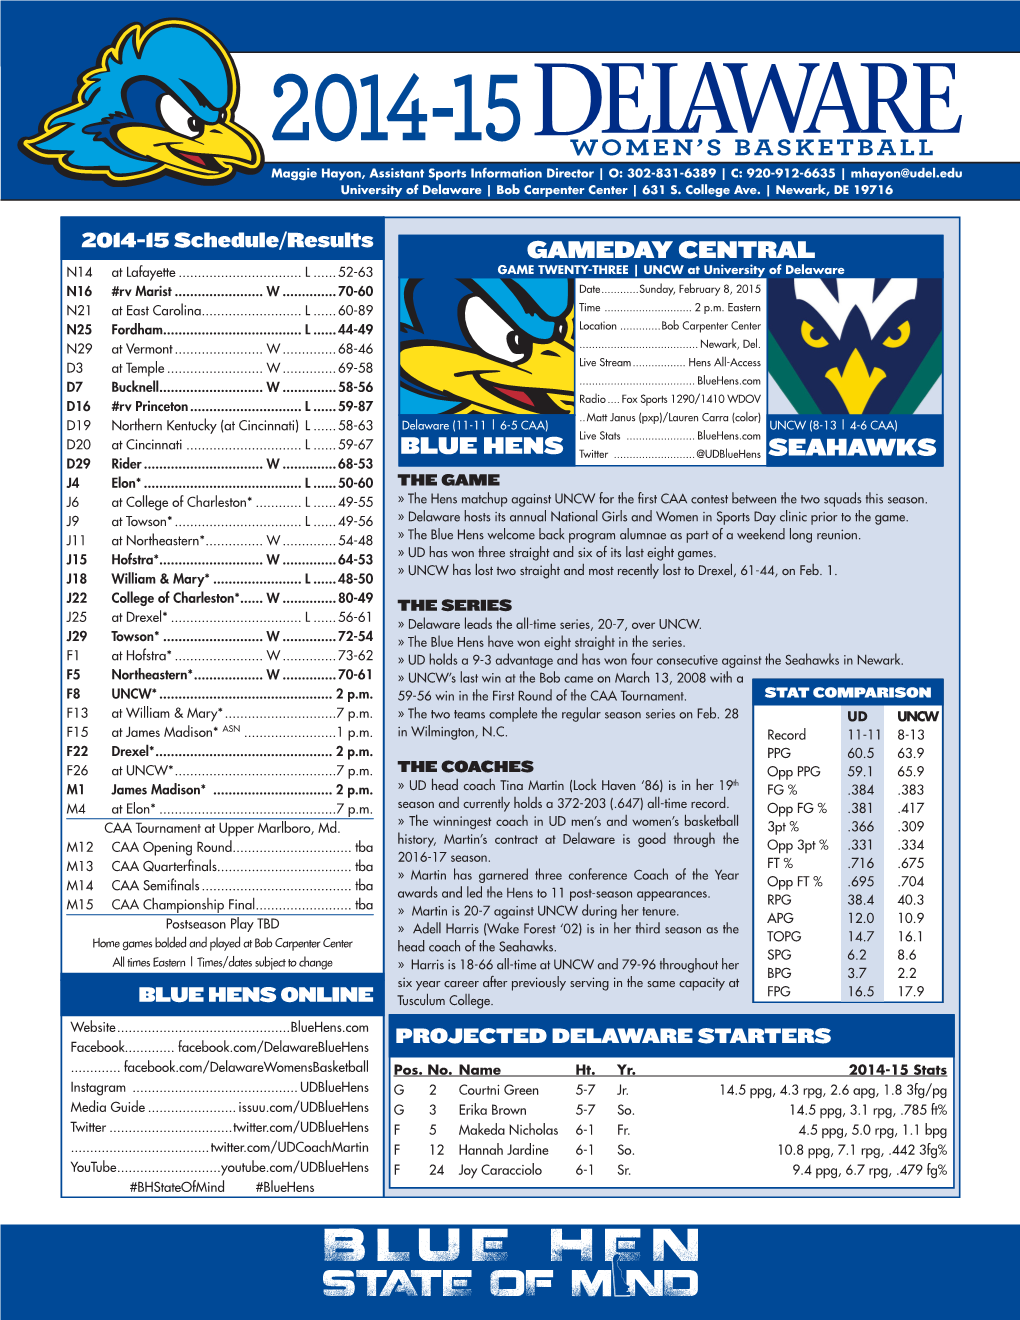 Seahawks Gameday Central Blue Hens